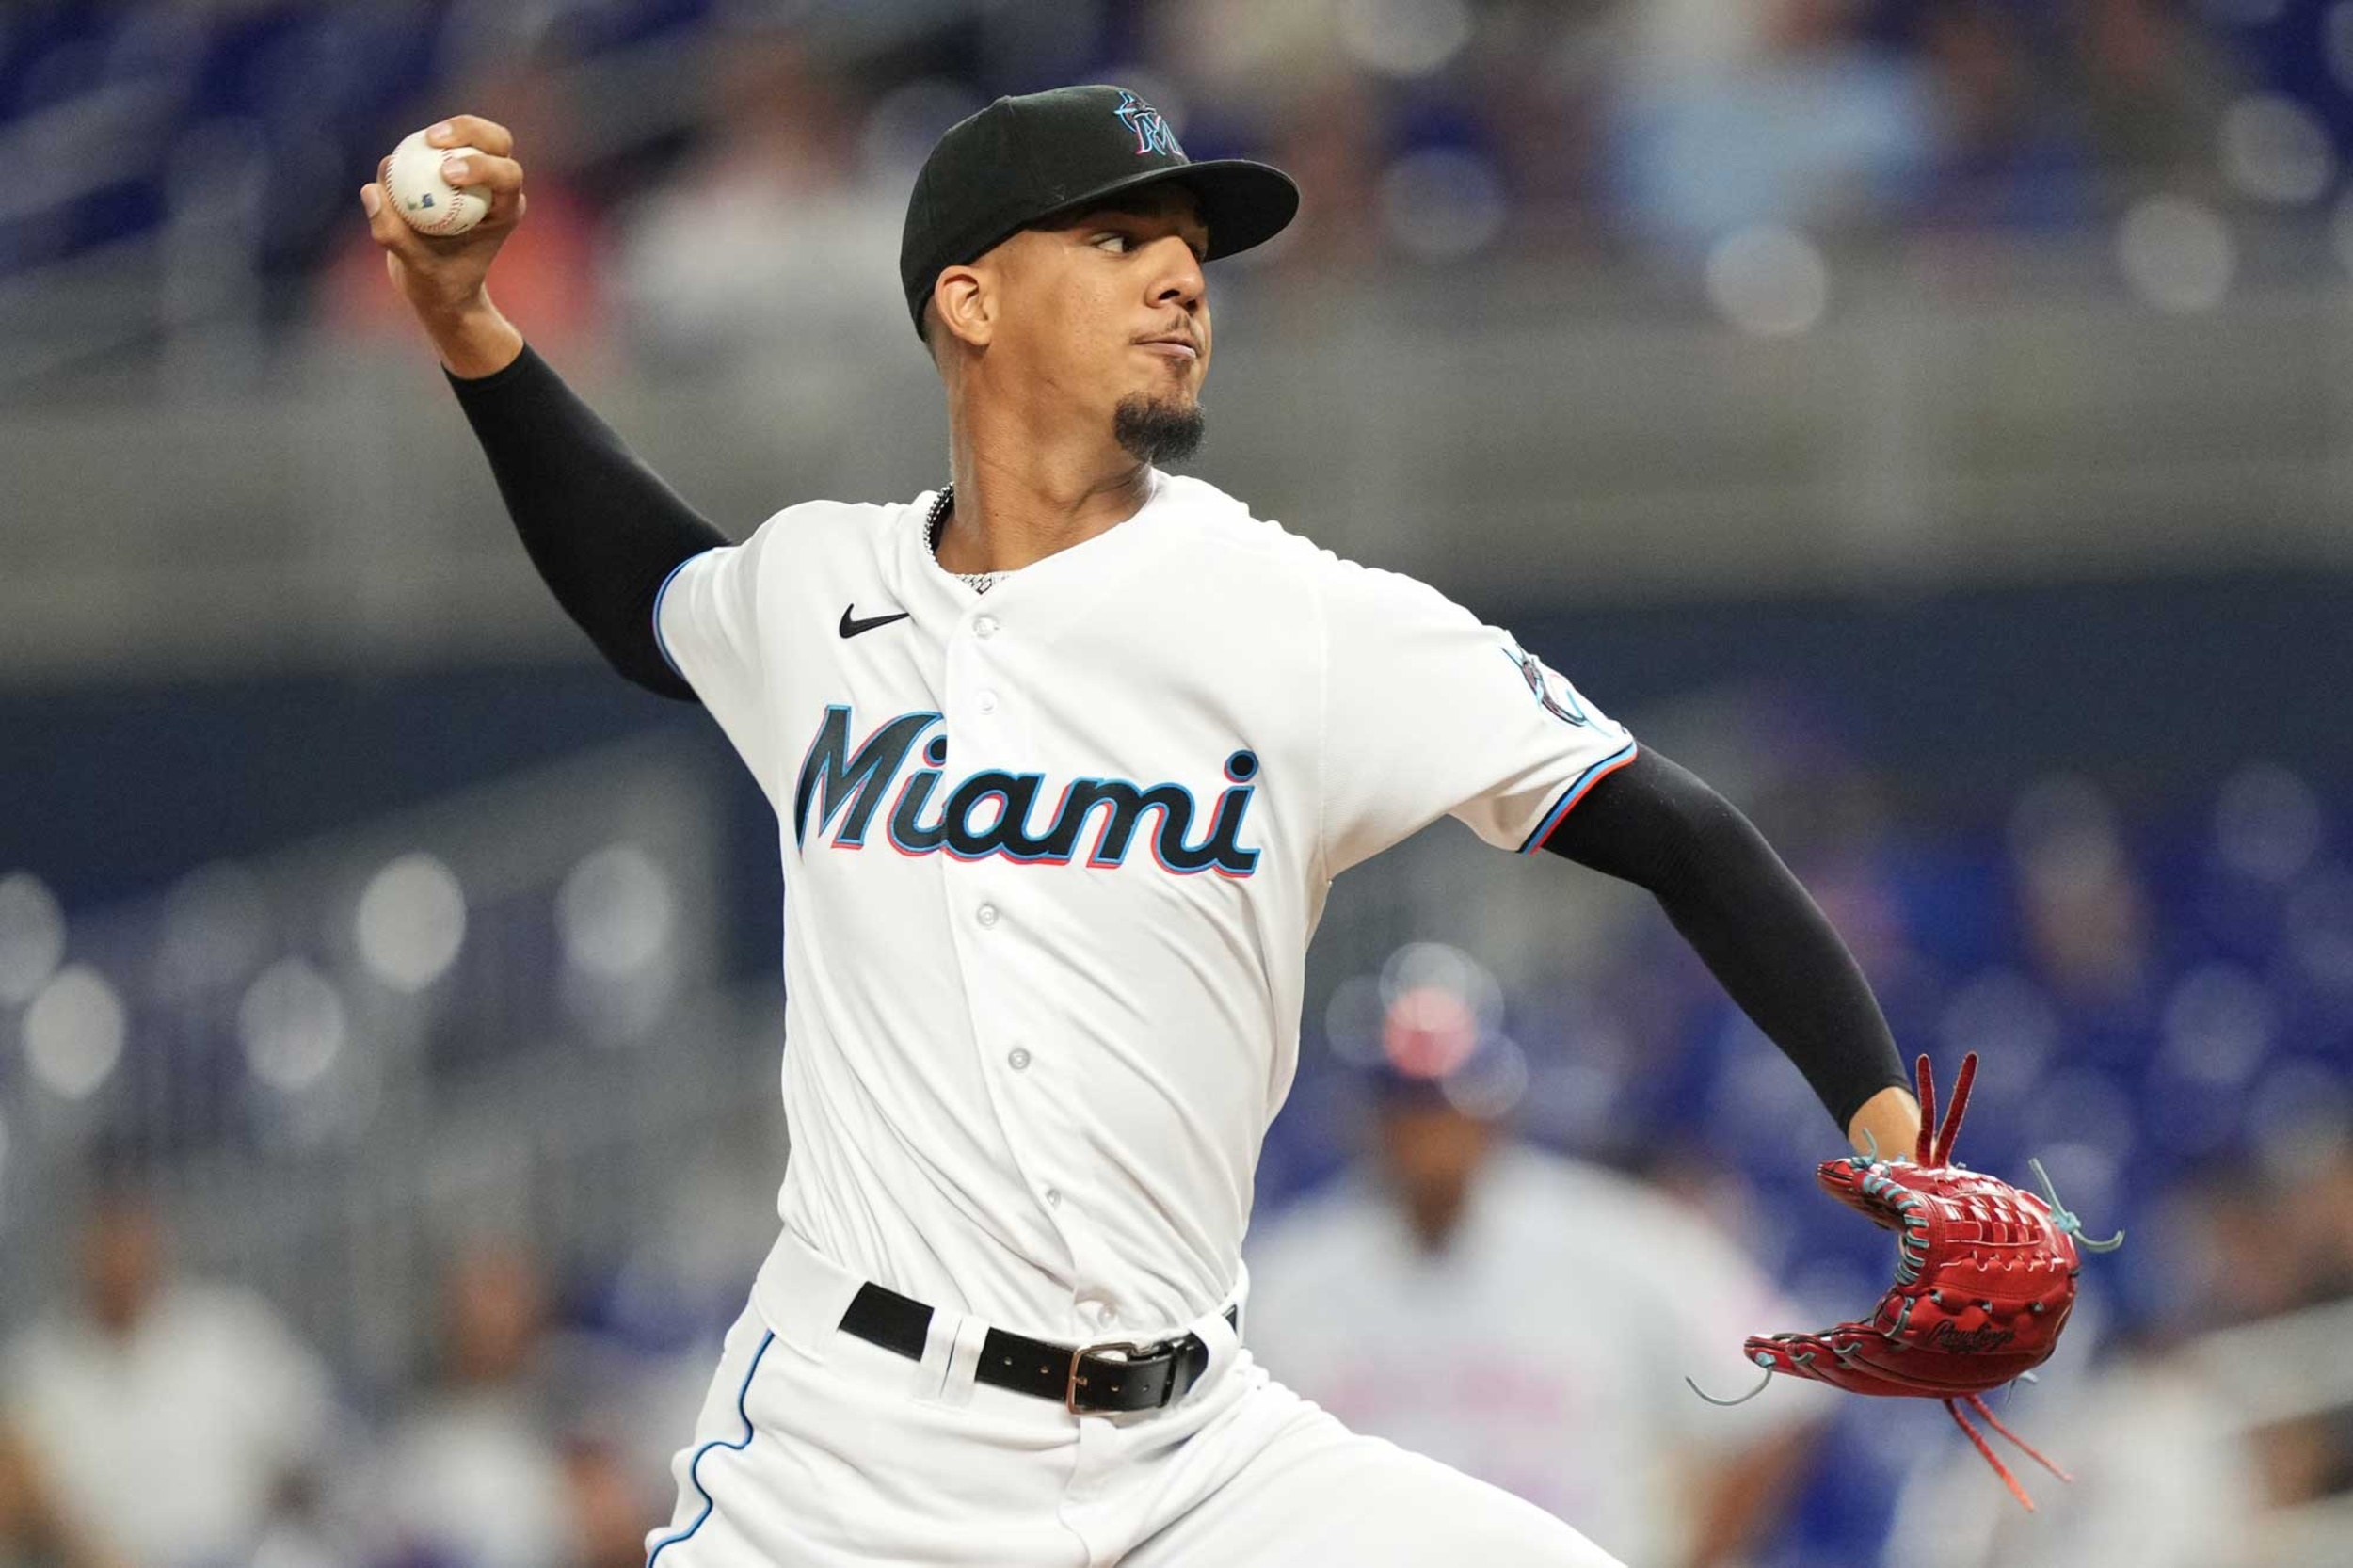 <p>Perez showed why he was the game's best pitching prospect when he posted a 3.15 ERA over his first 19 starts last season. The pressure will be on Perez to be even better this year due to Sandy Alcantara's absence following Tommy John surgery. Miami is likely to limit Perez's innings, but he could still play a key role.</p><p>You may also like: <a href='https://www.yardbarker.com/mlb/articles/the_24_best_players_in_baltimore_orioles_history_030924/s1__38824422'>The 24 best players in Baltimore Orioles history</a></p>